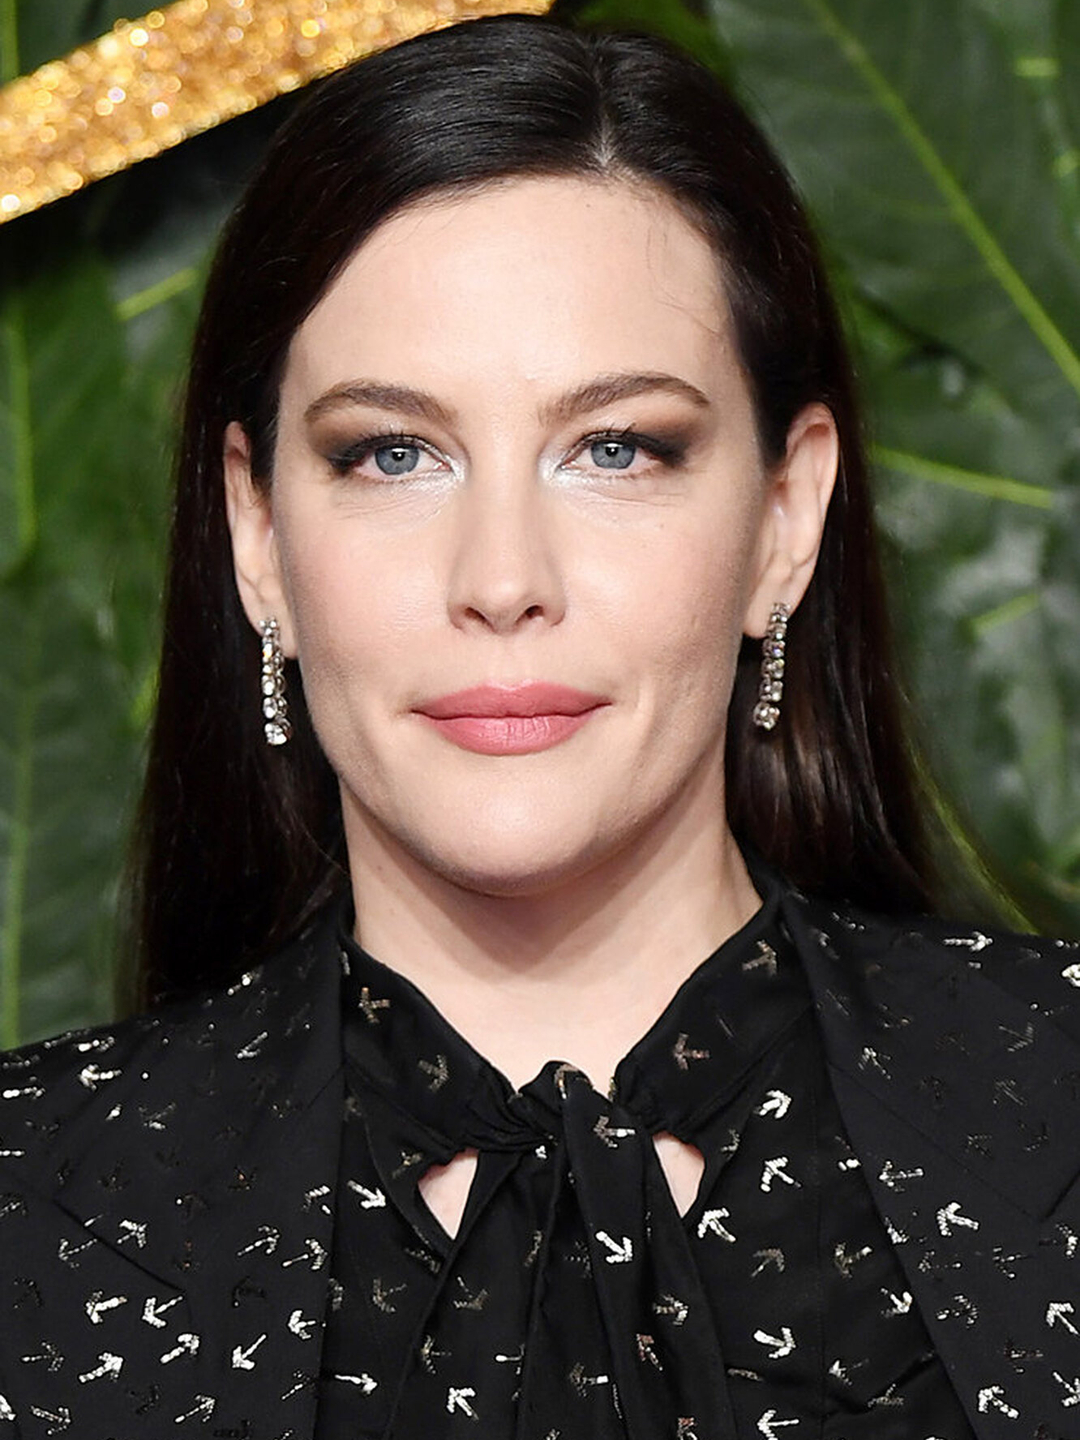 Liv Tyler who is her mother